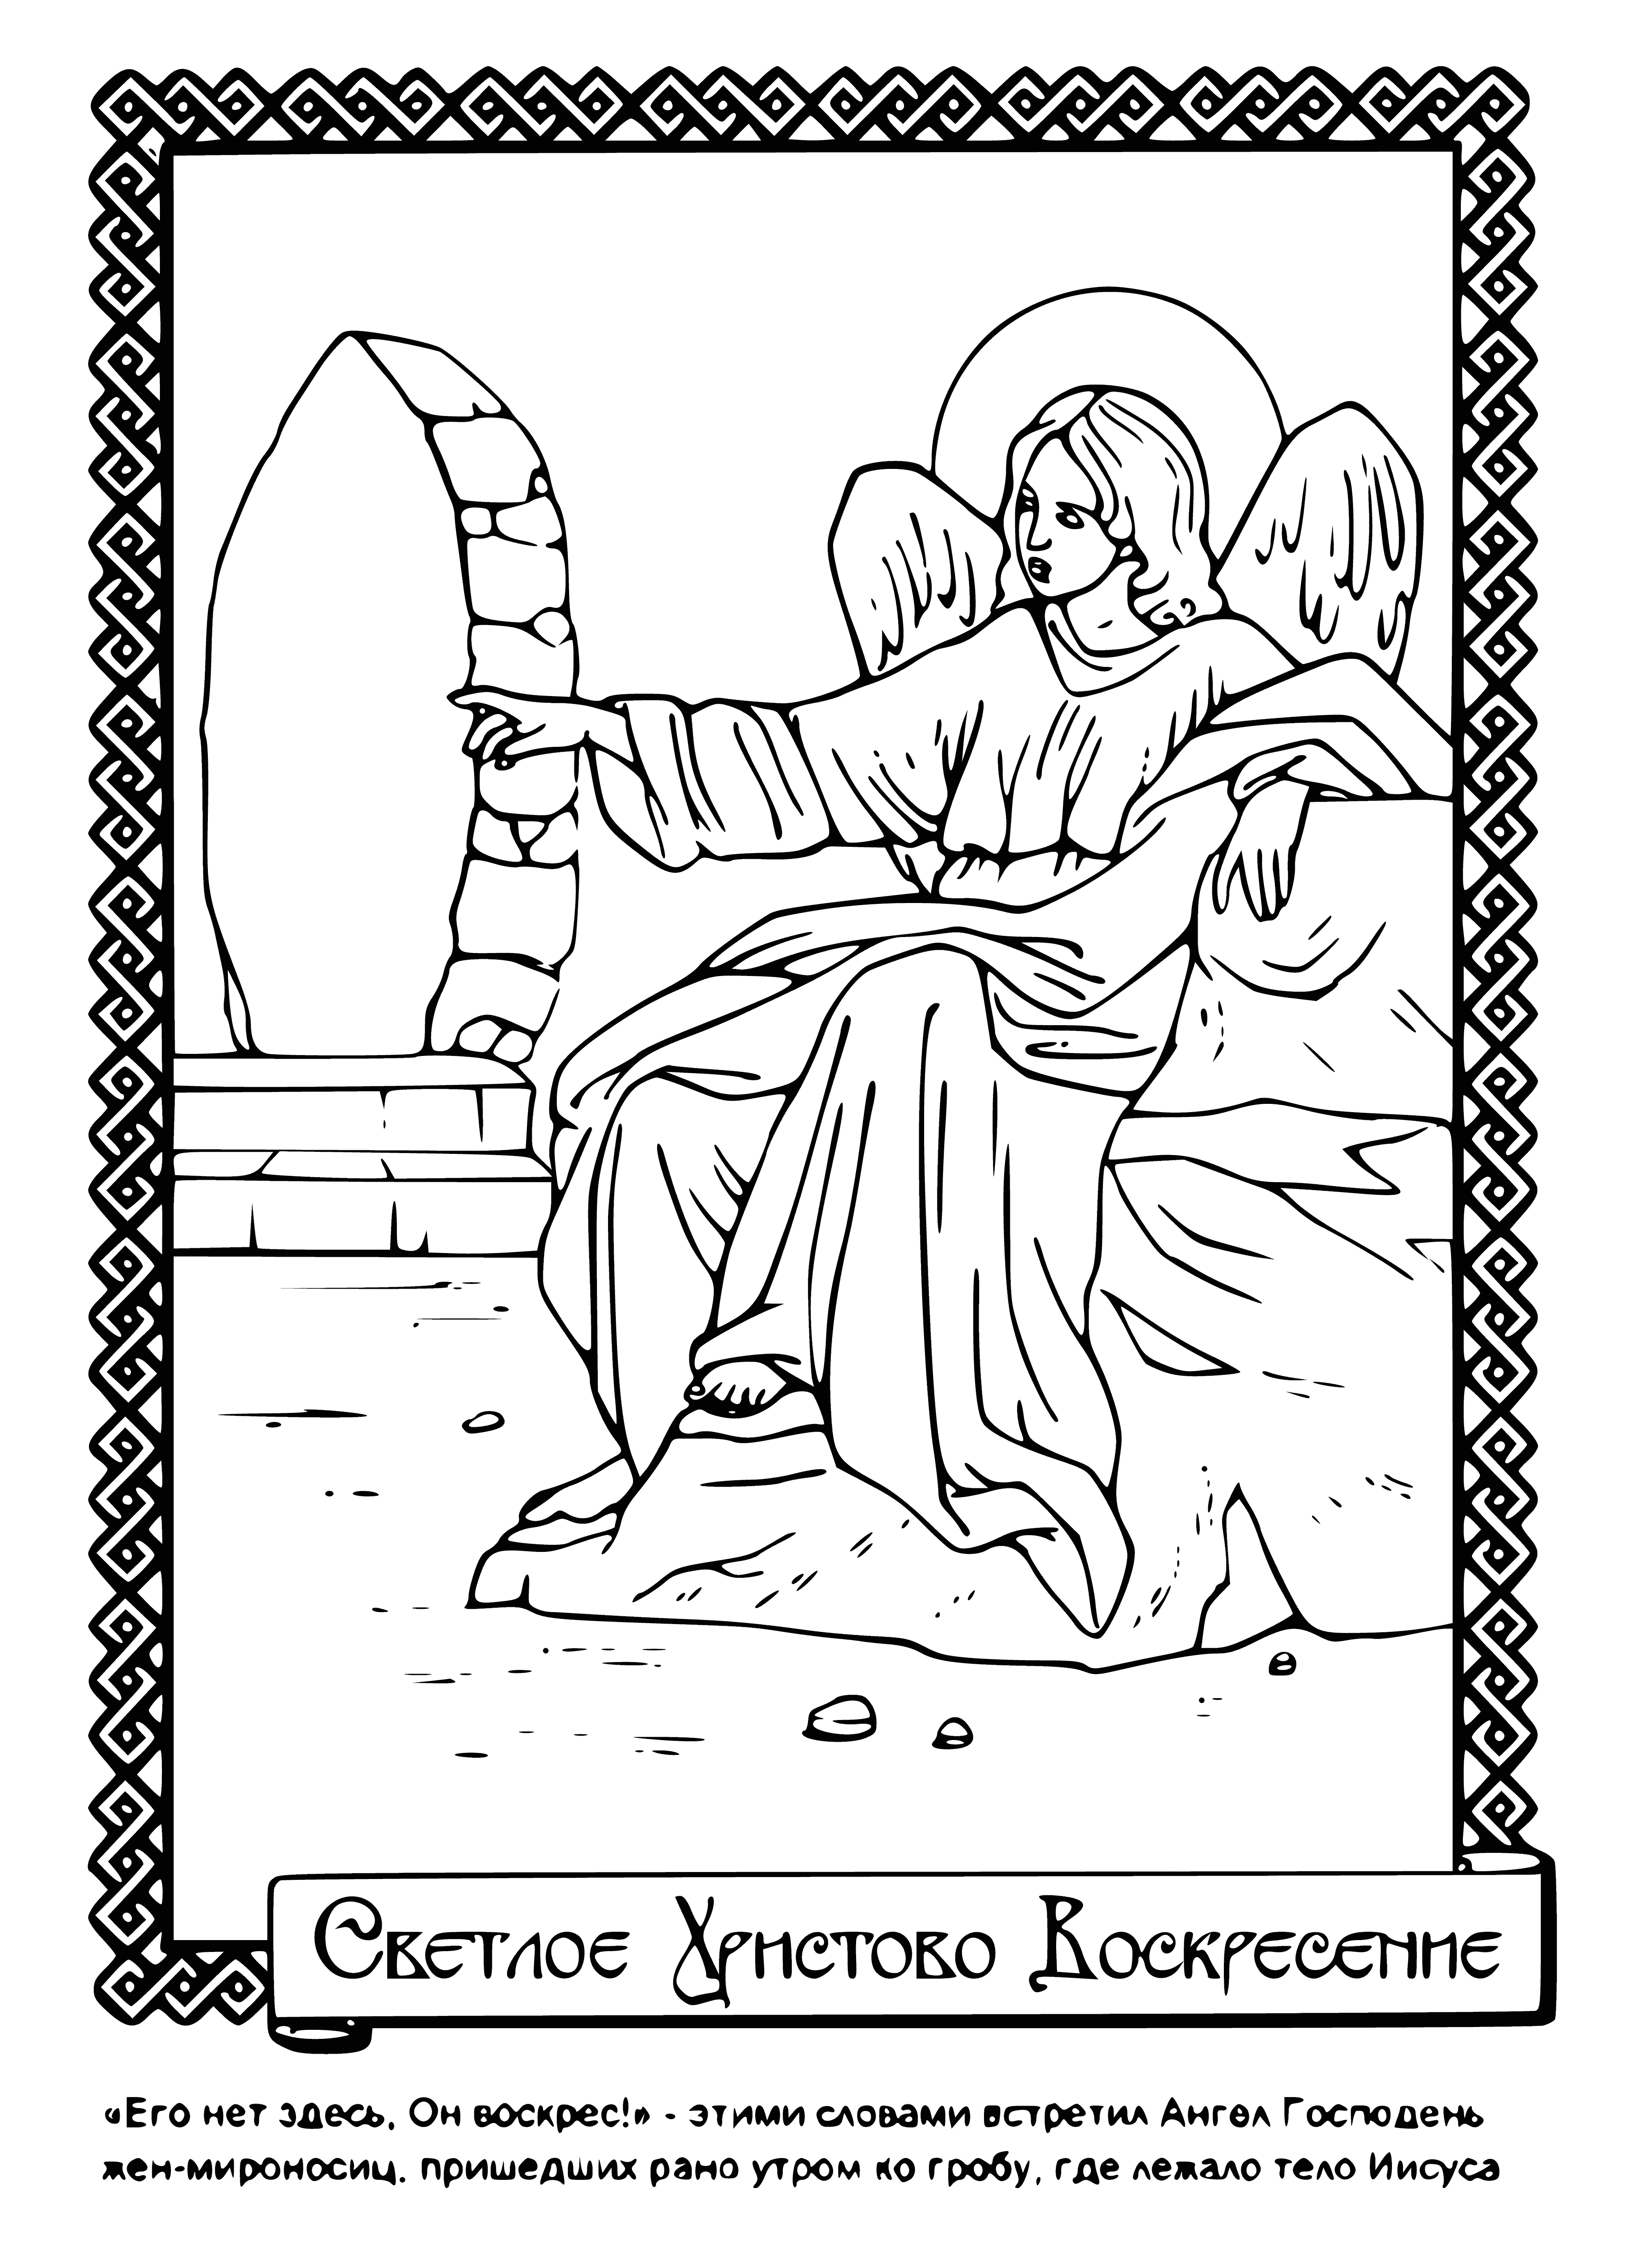 coloring page: Dark cross in center of page, flanked by 2 dark figures. White figure in foreground at bottom.